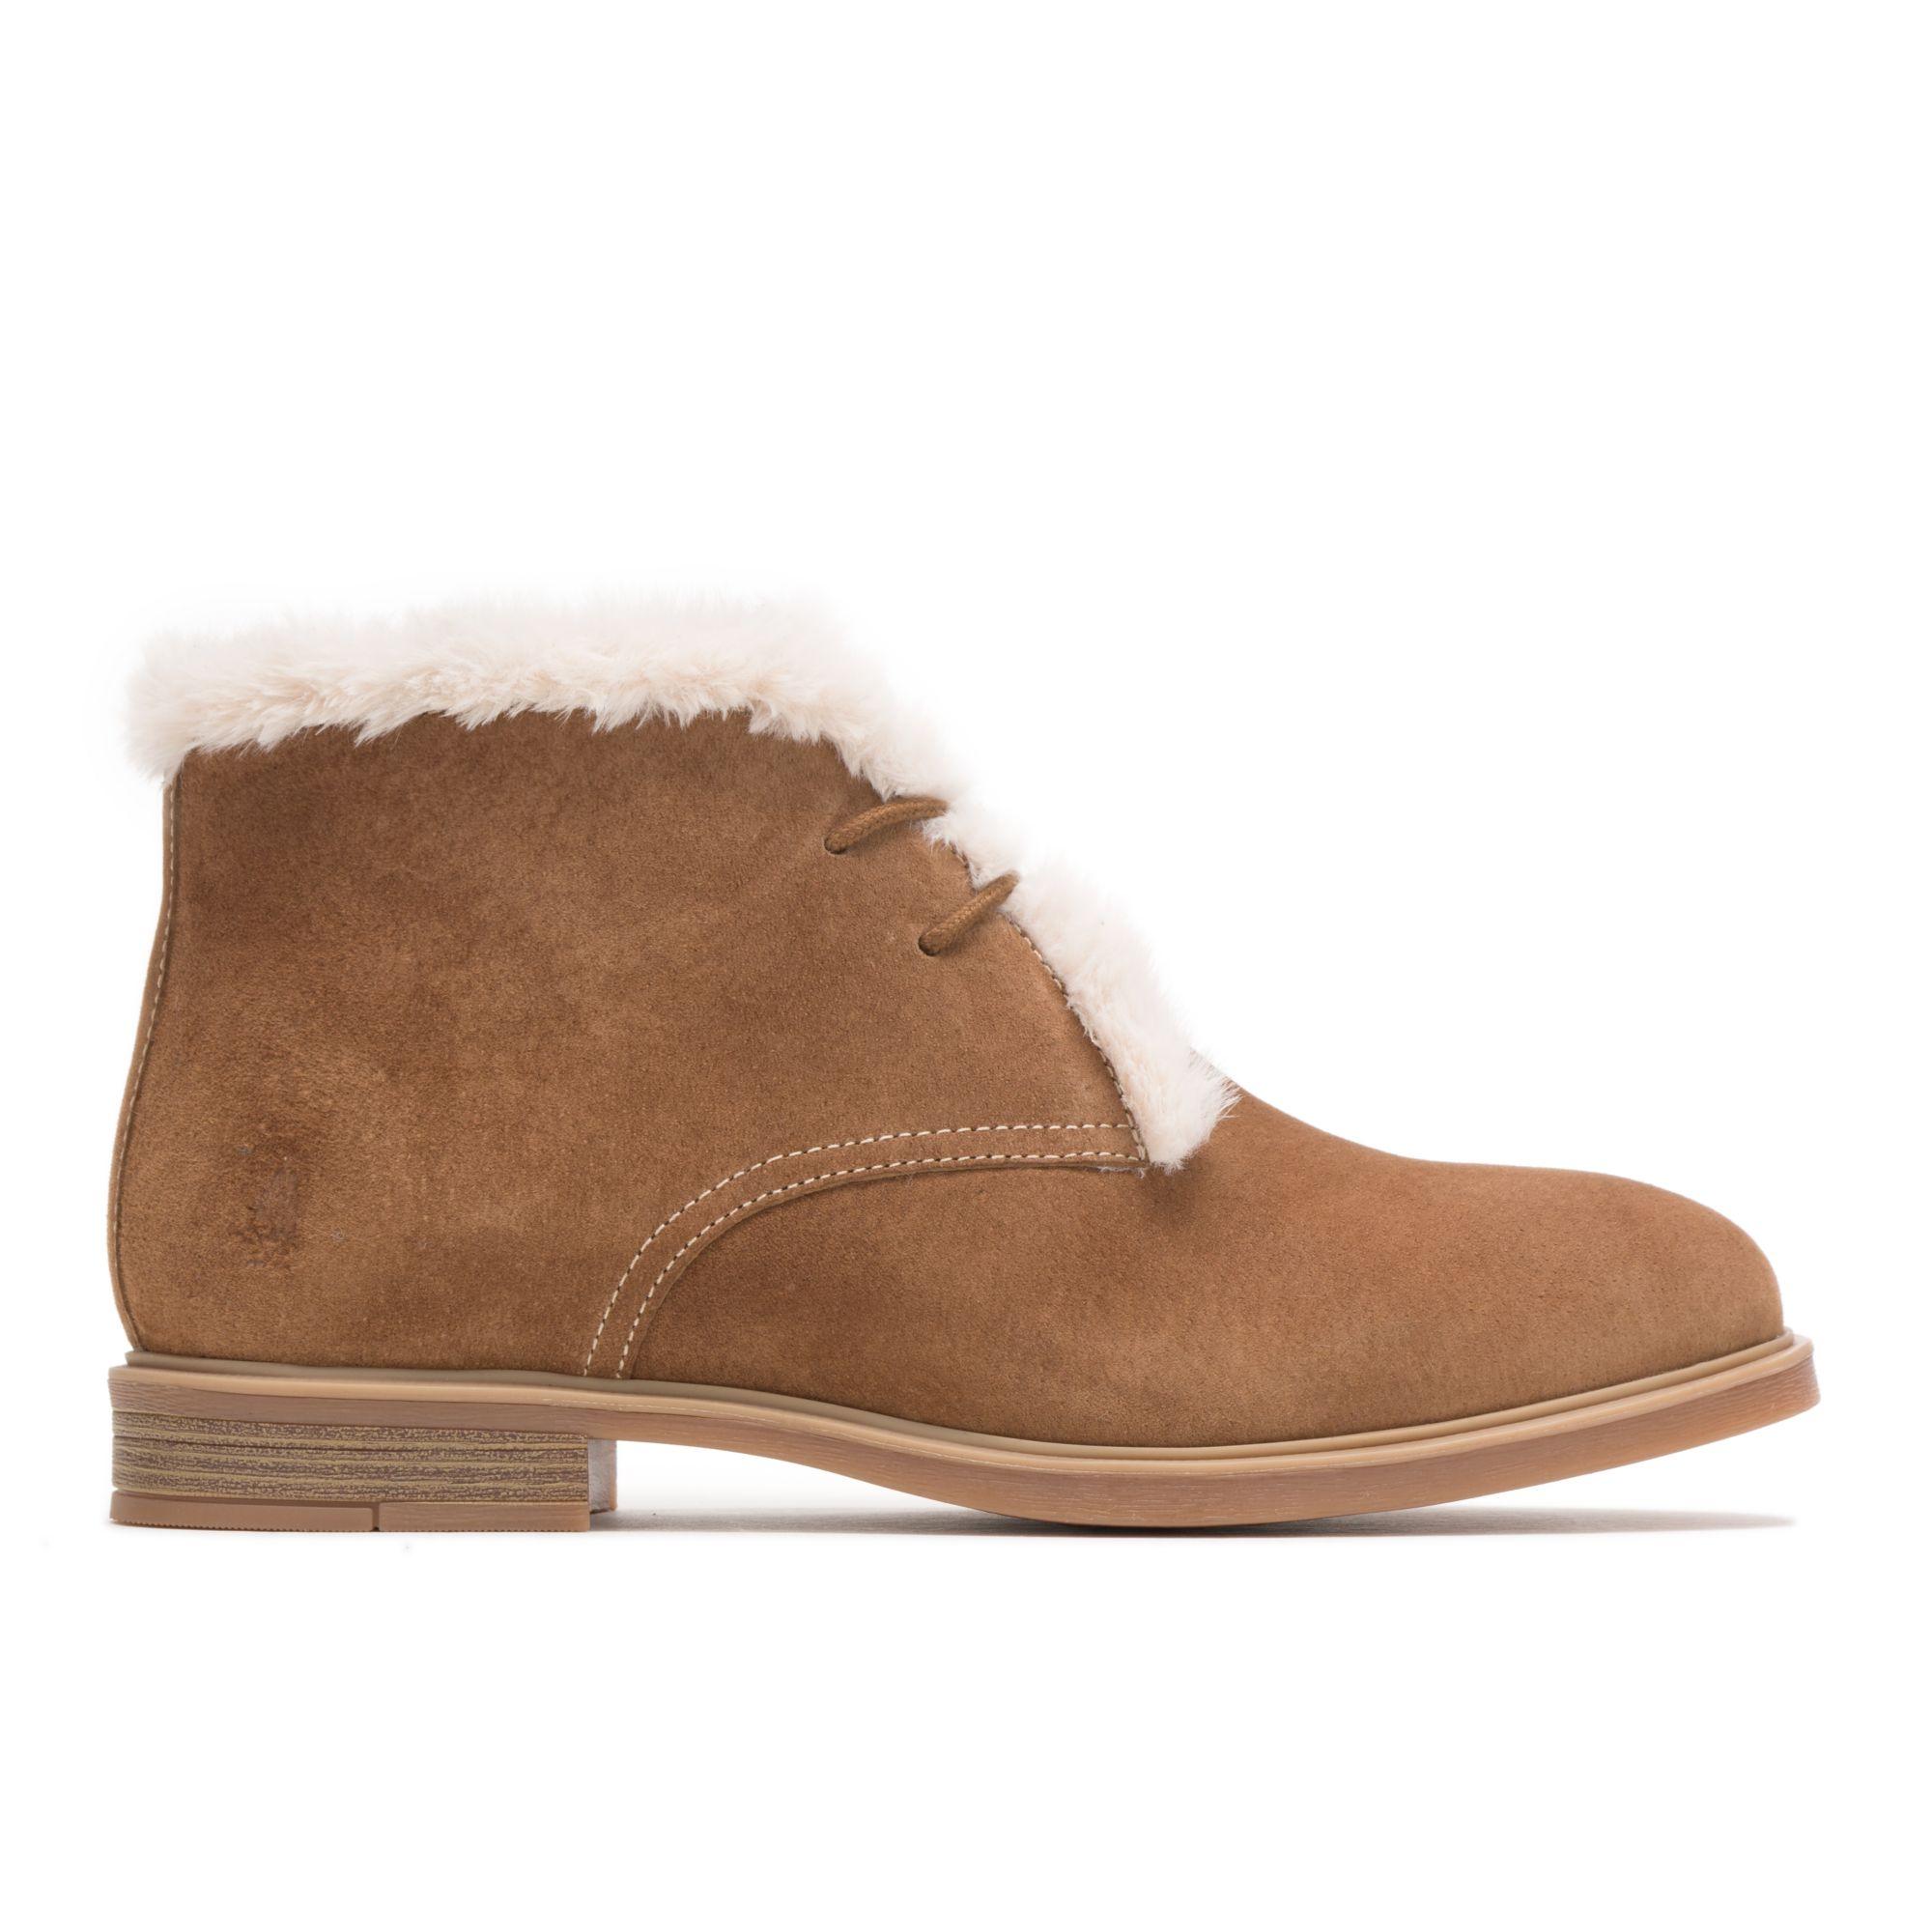 Hush Puppies Bailey Fur Chukka Boots in Chestnut Suede (Brown) - Lyst